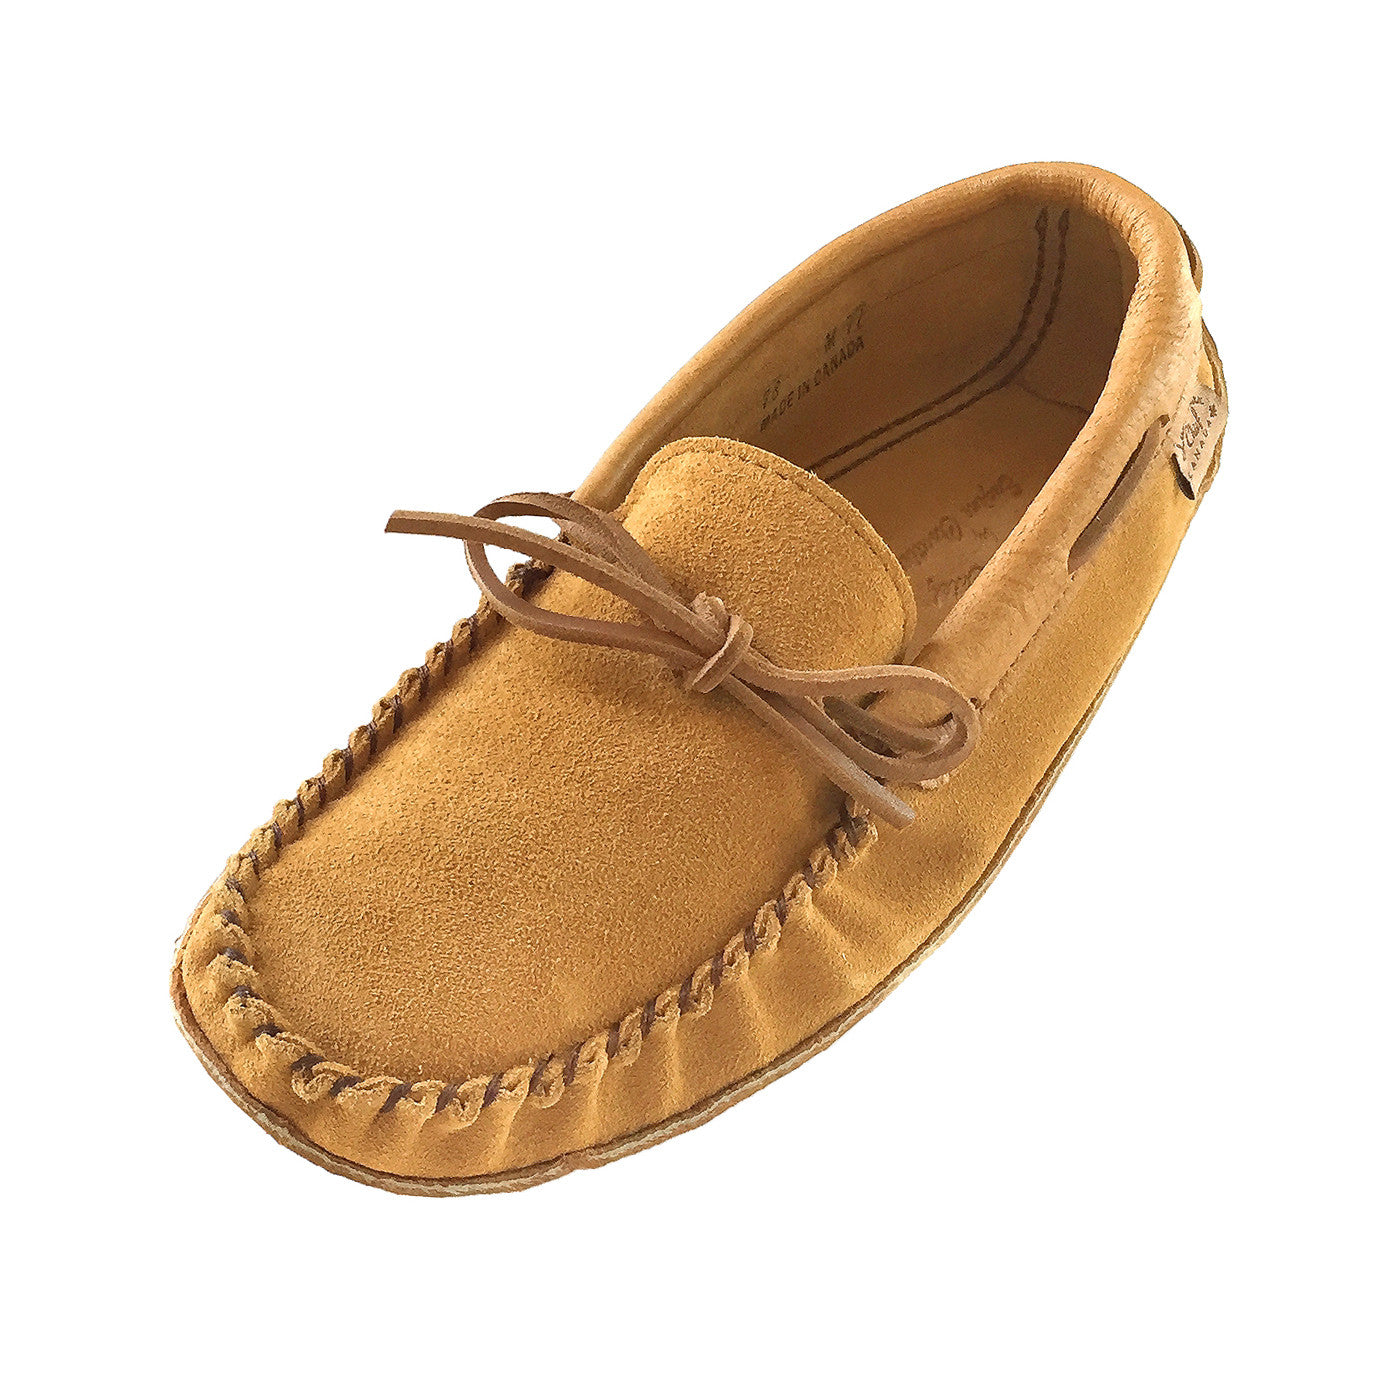 Genuine Suede Soft Sole Indoor Casual Moccasin Slippers – Leather-